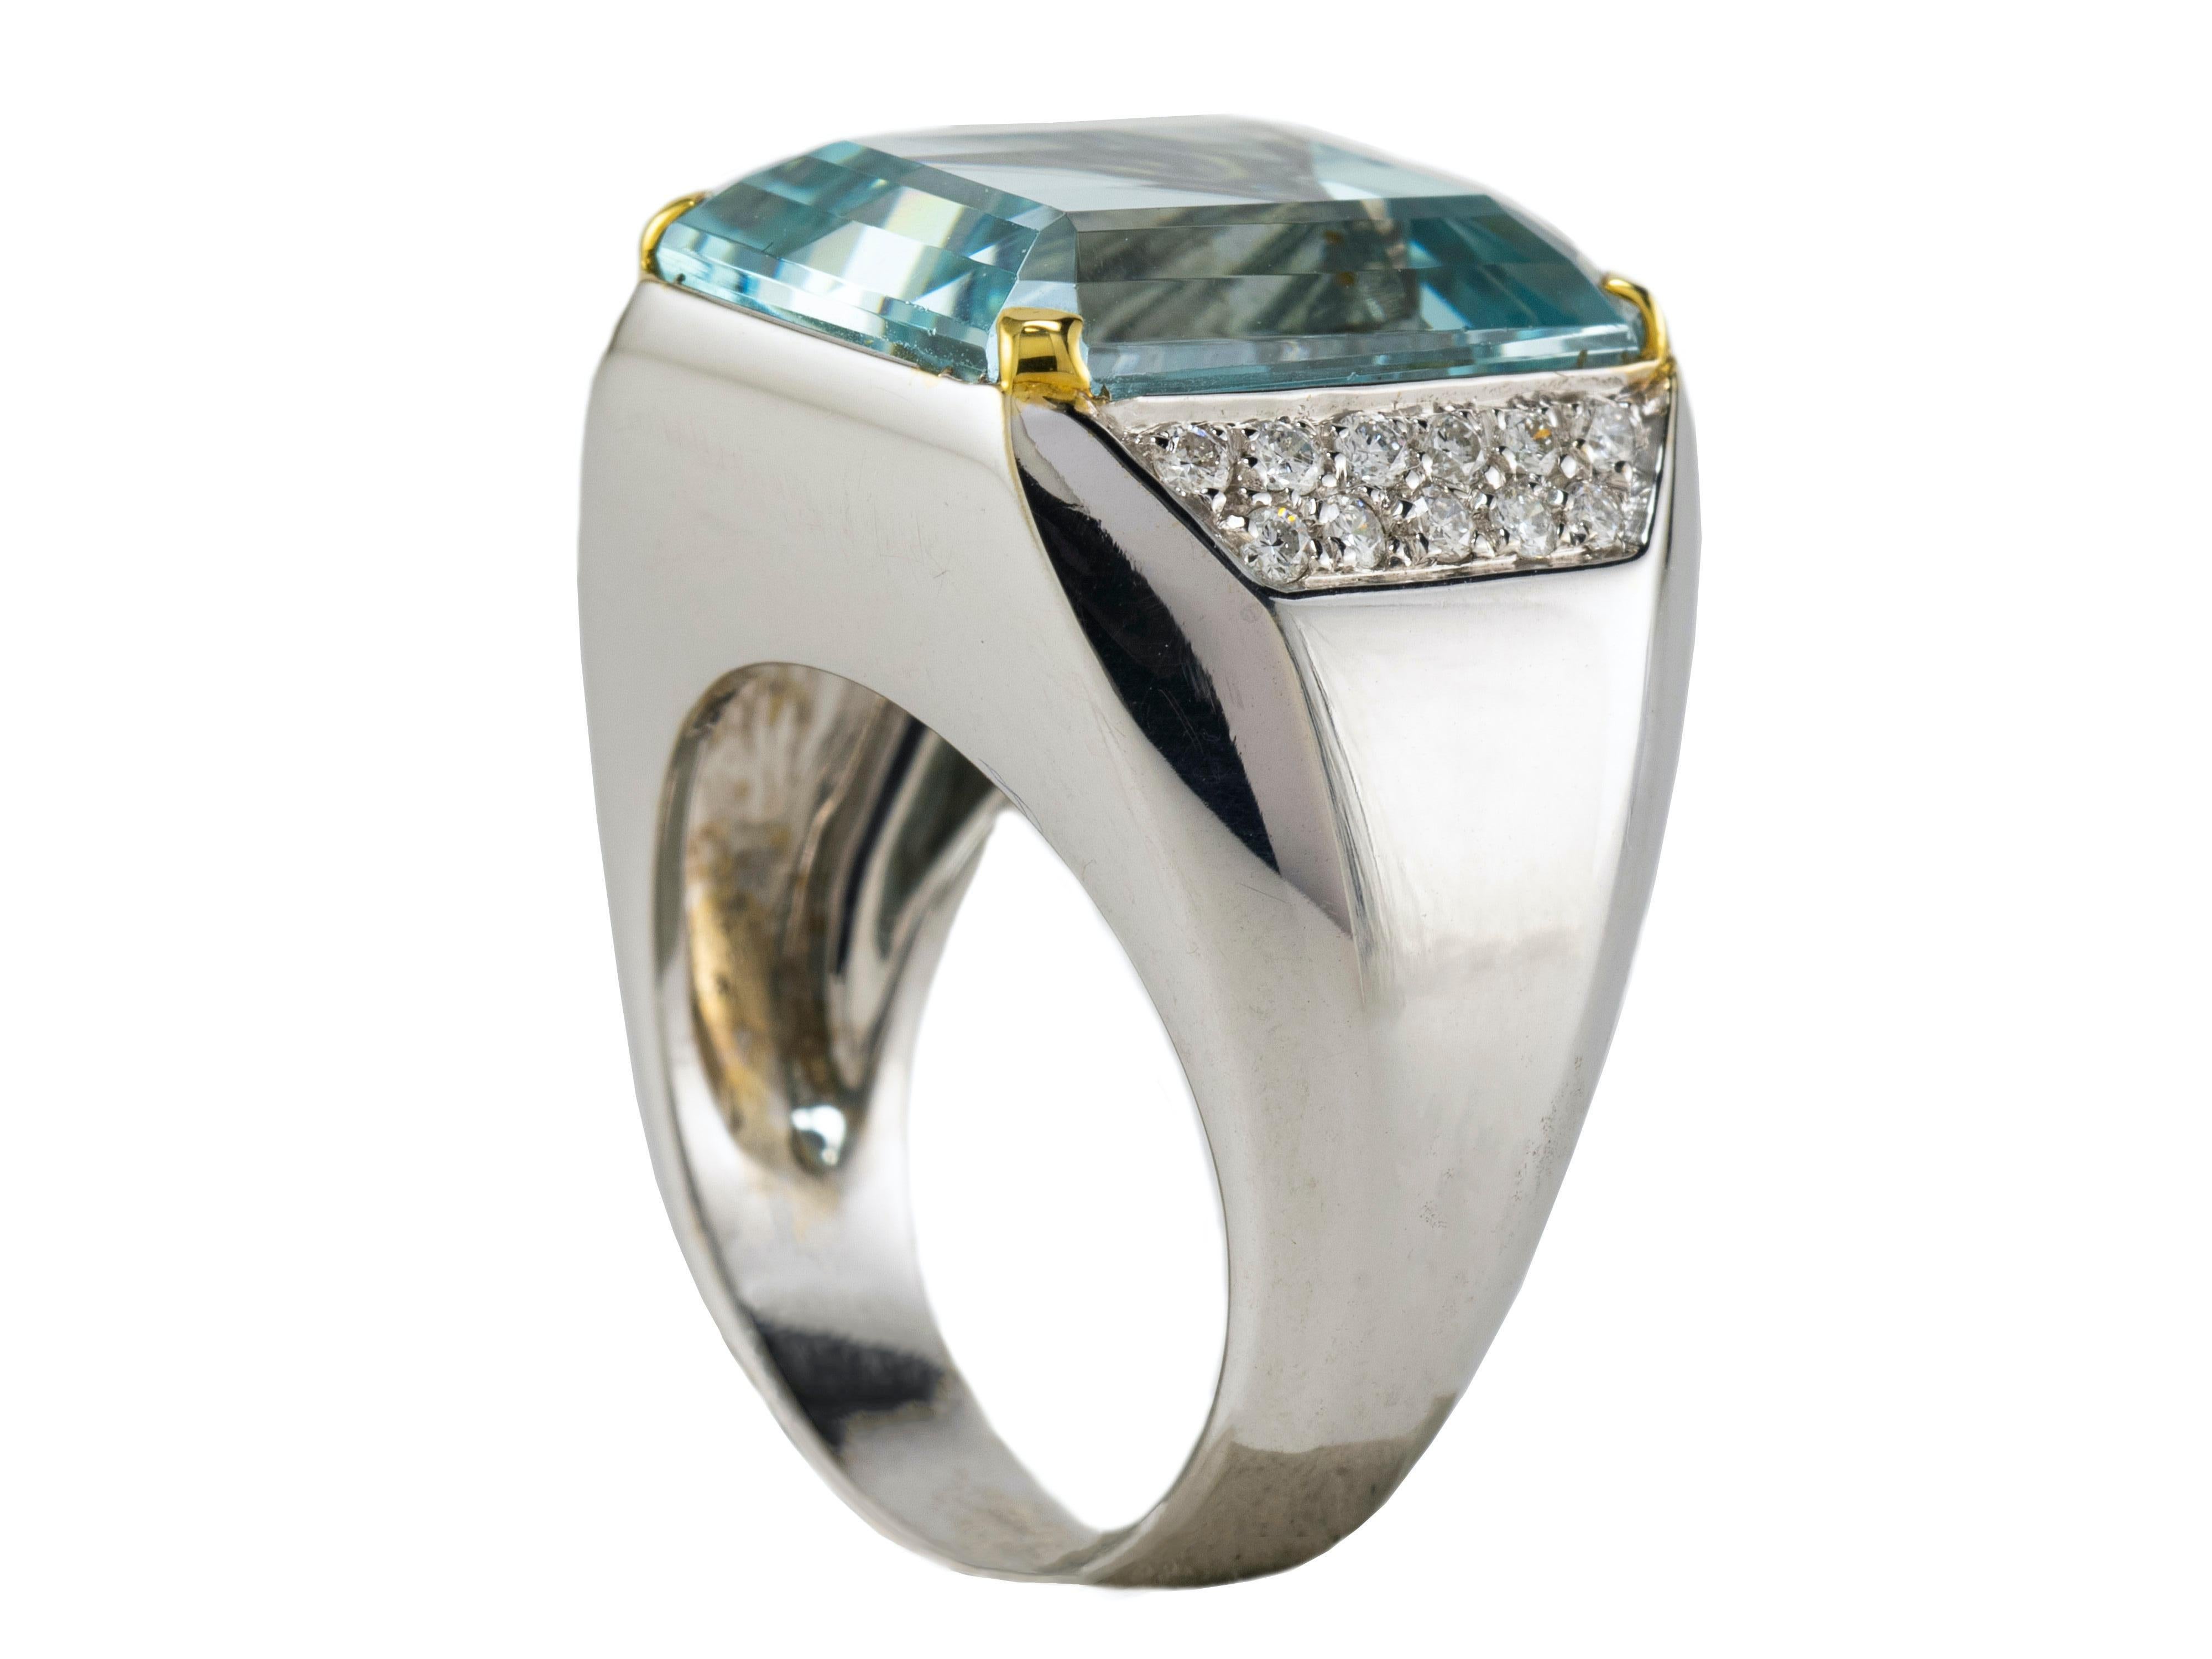 A beautiful and sparkling color combination of white and blue stones.
This cocktail ring has a very fine manufacture and it is a unique piece.
The Aquamarine has a very balanced color, it is almost without inclusions in its inside.
The Aquamarine